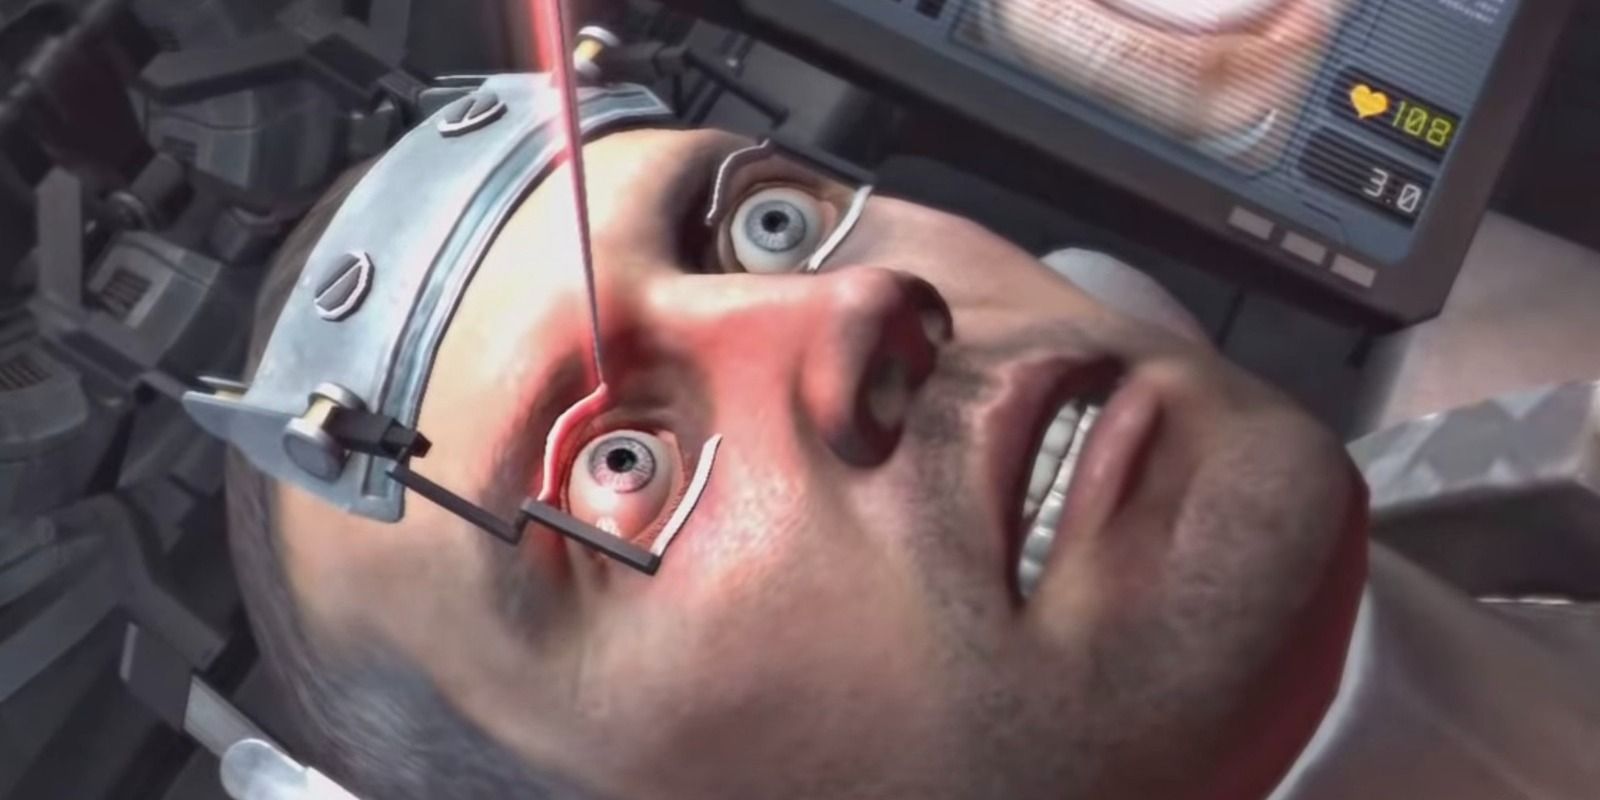 Dead Space 2 - A needle approaches Isaac Clarke's eye